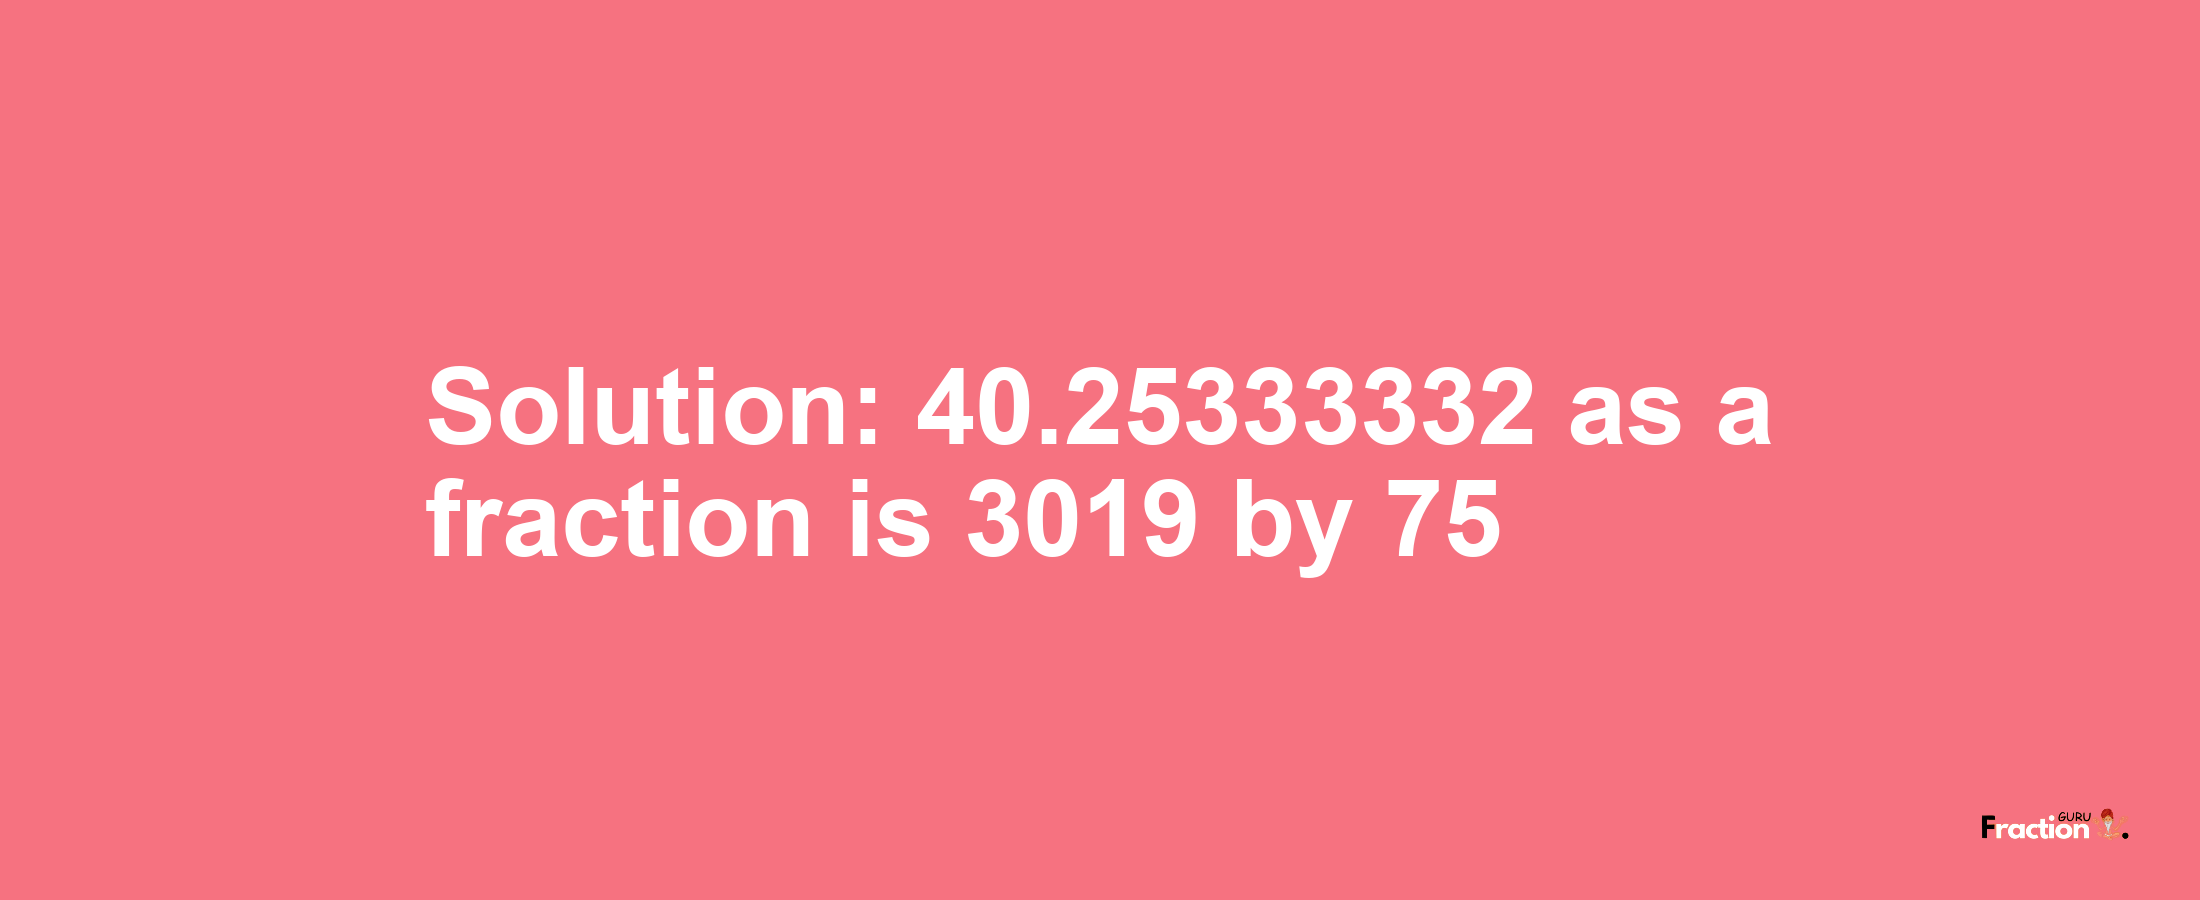 Solution:40.25333332 as a fraction is 3019/75